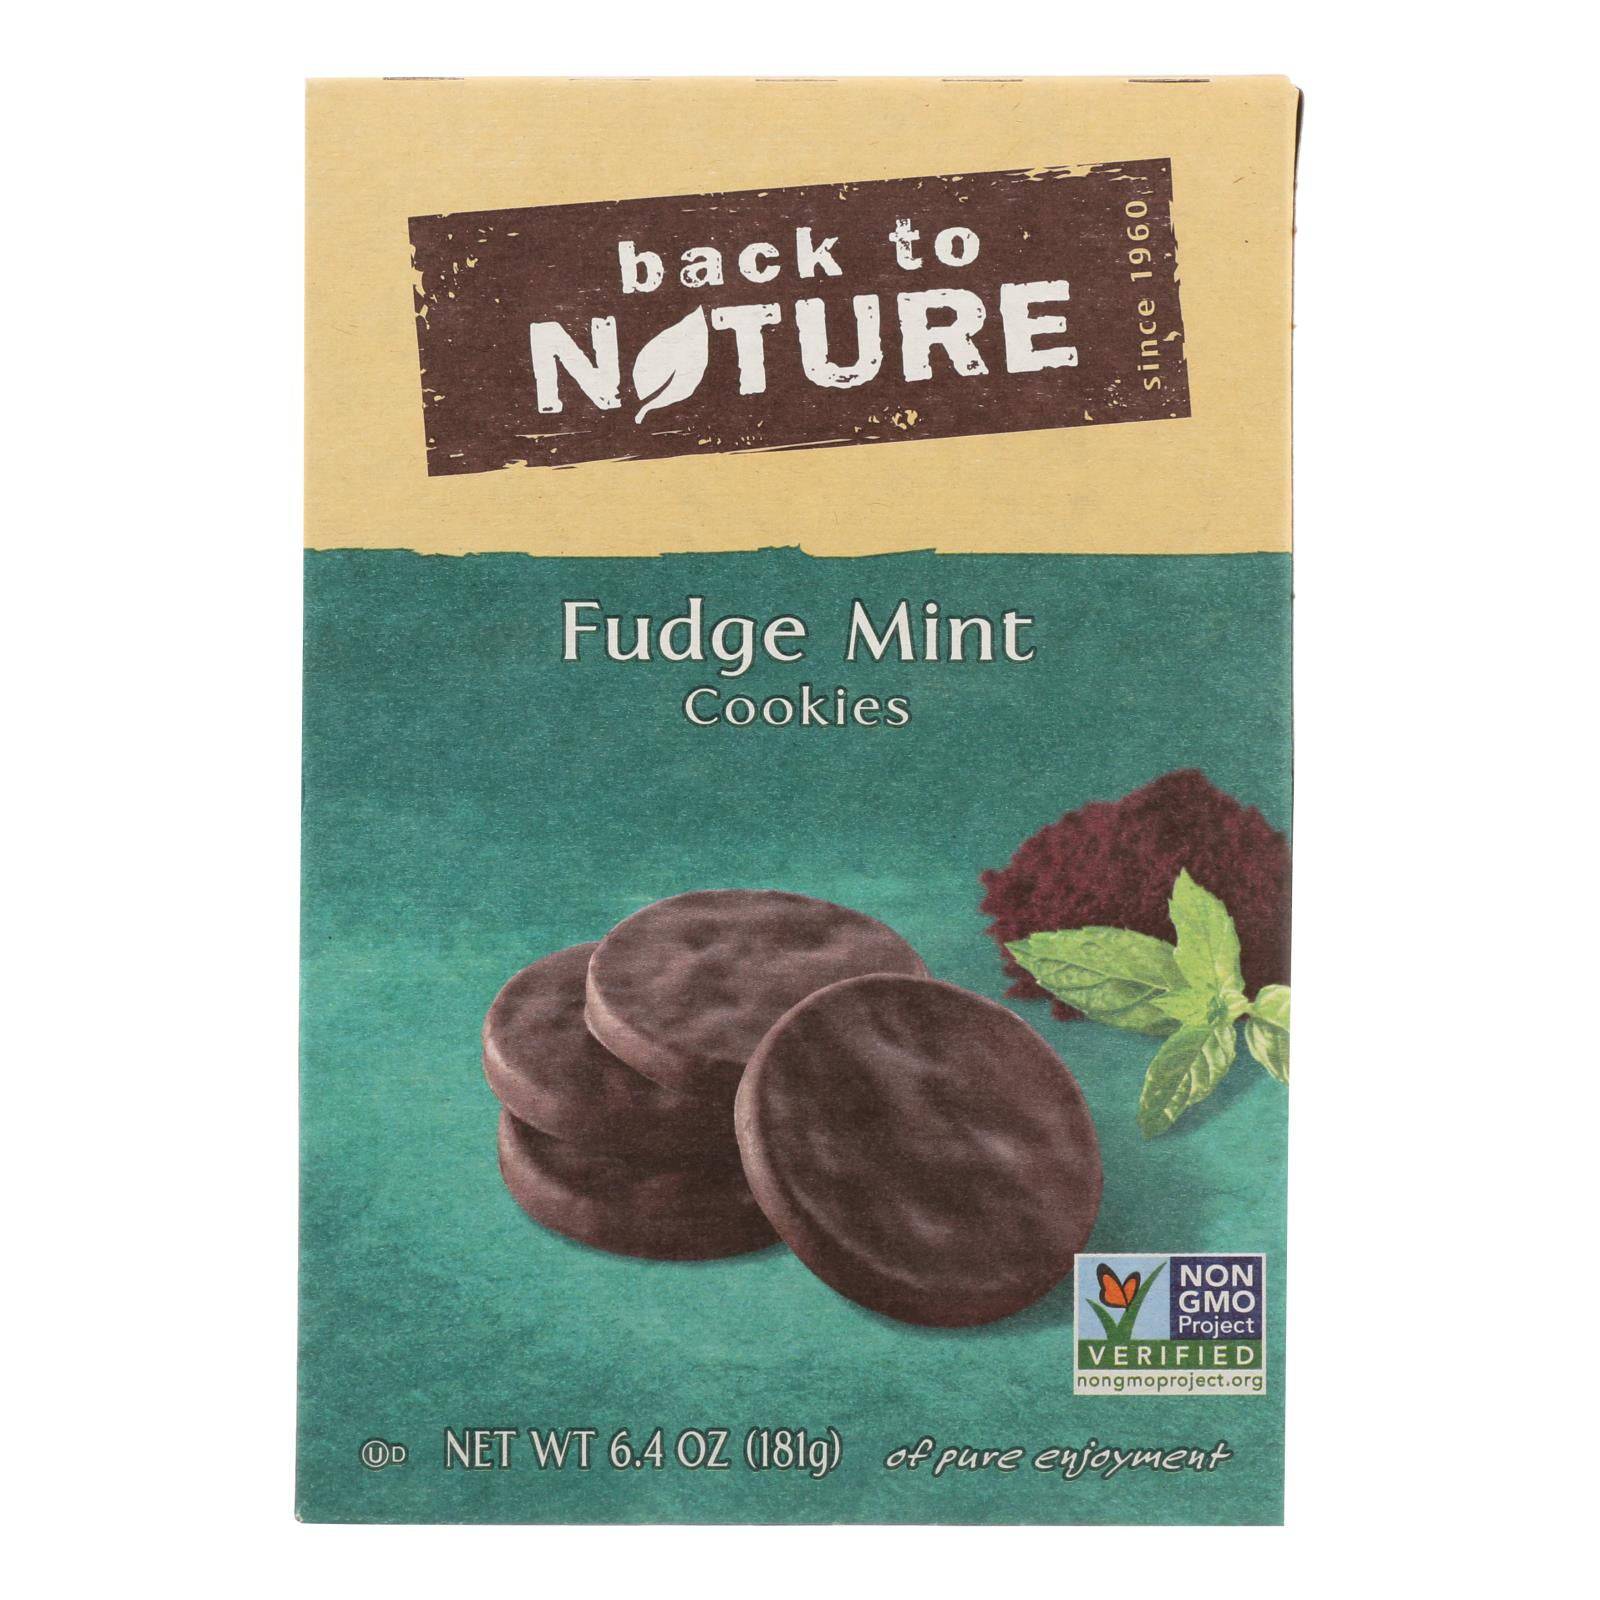 Buy Back To Nature Cookies - Fudge Mint - Case Of 6 - 6.4 Oz.  at OnlyNaturals.us